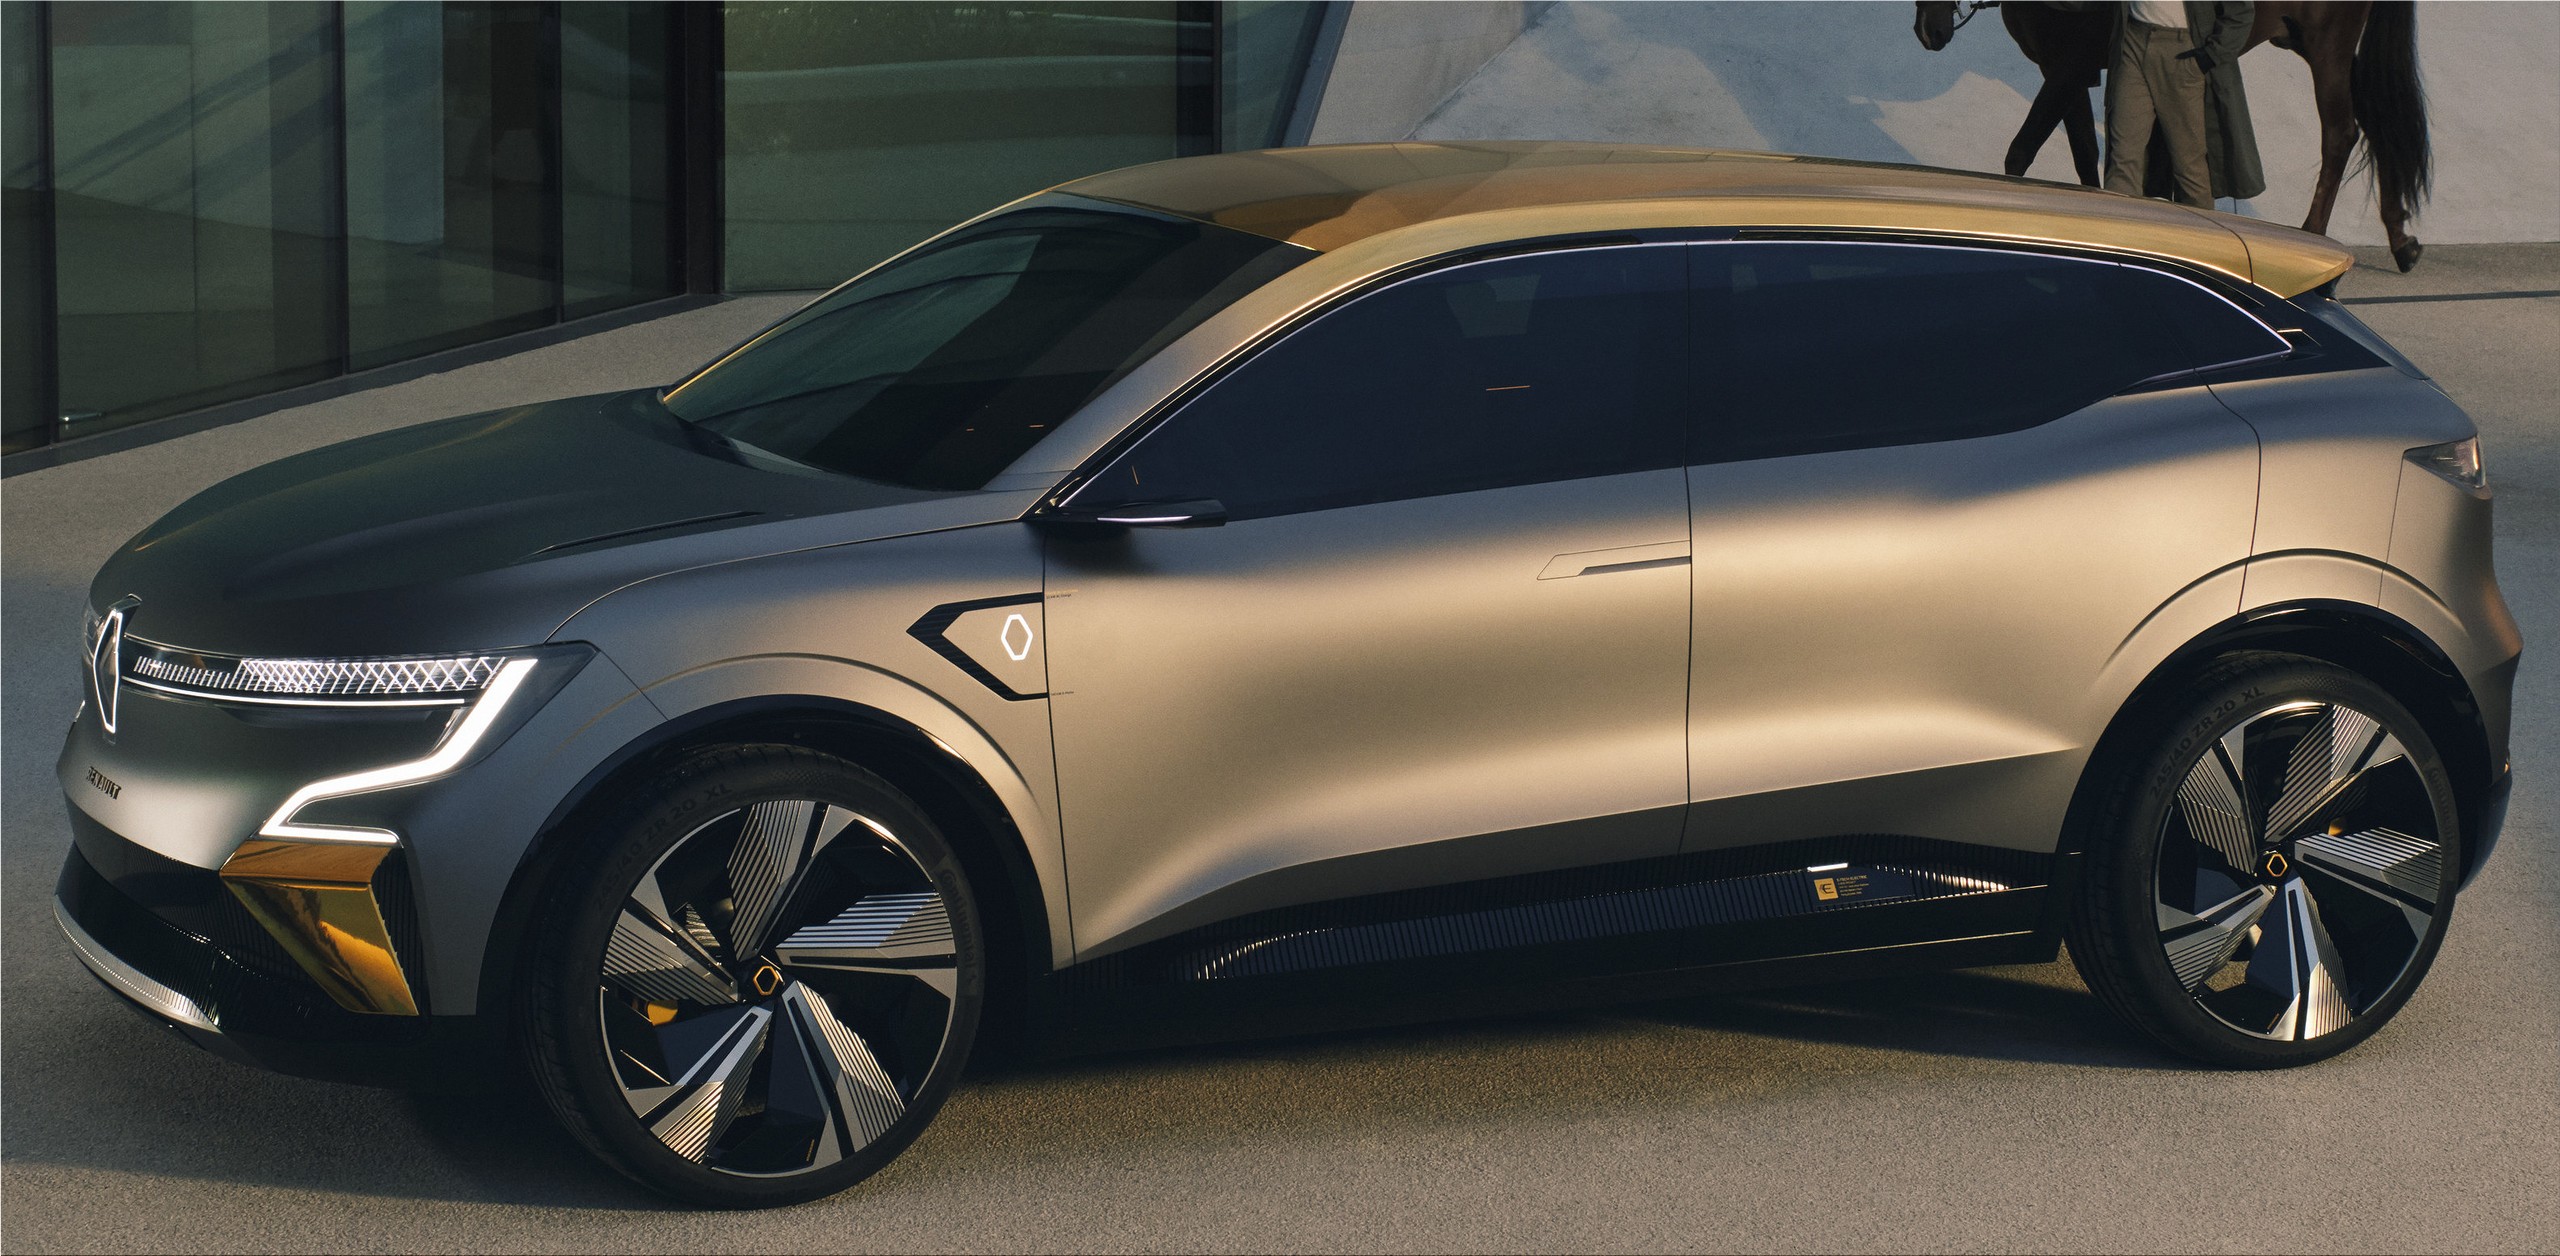 The new Renault Megane eVision is an electric crossover/station wagon